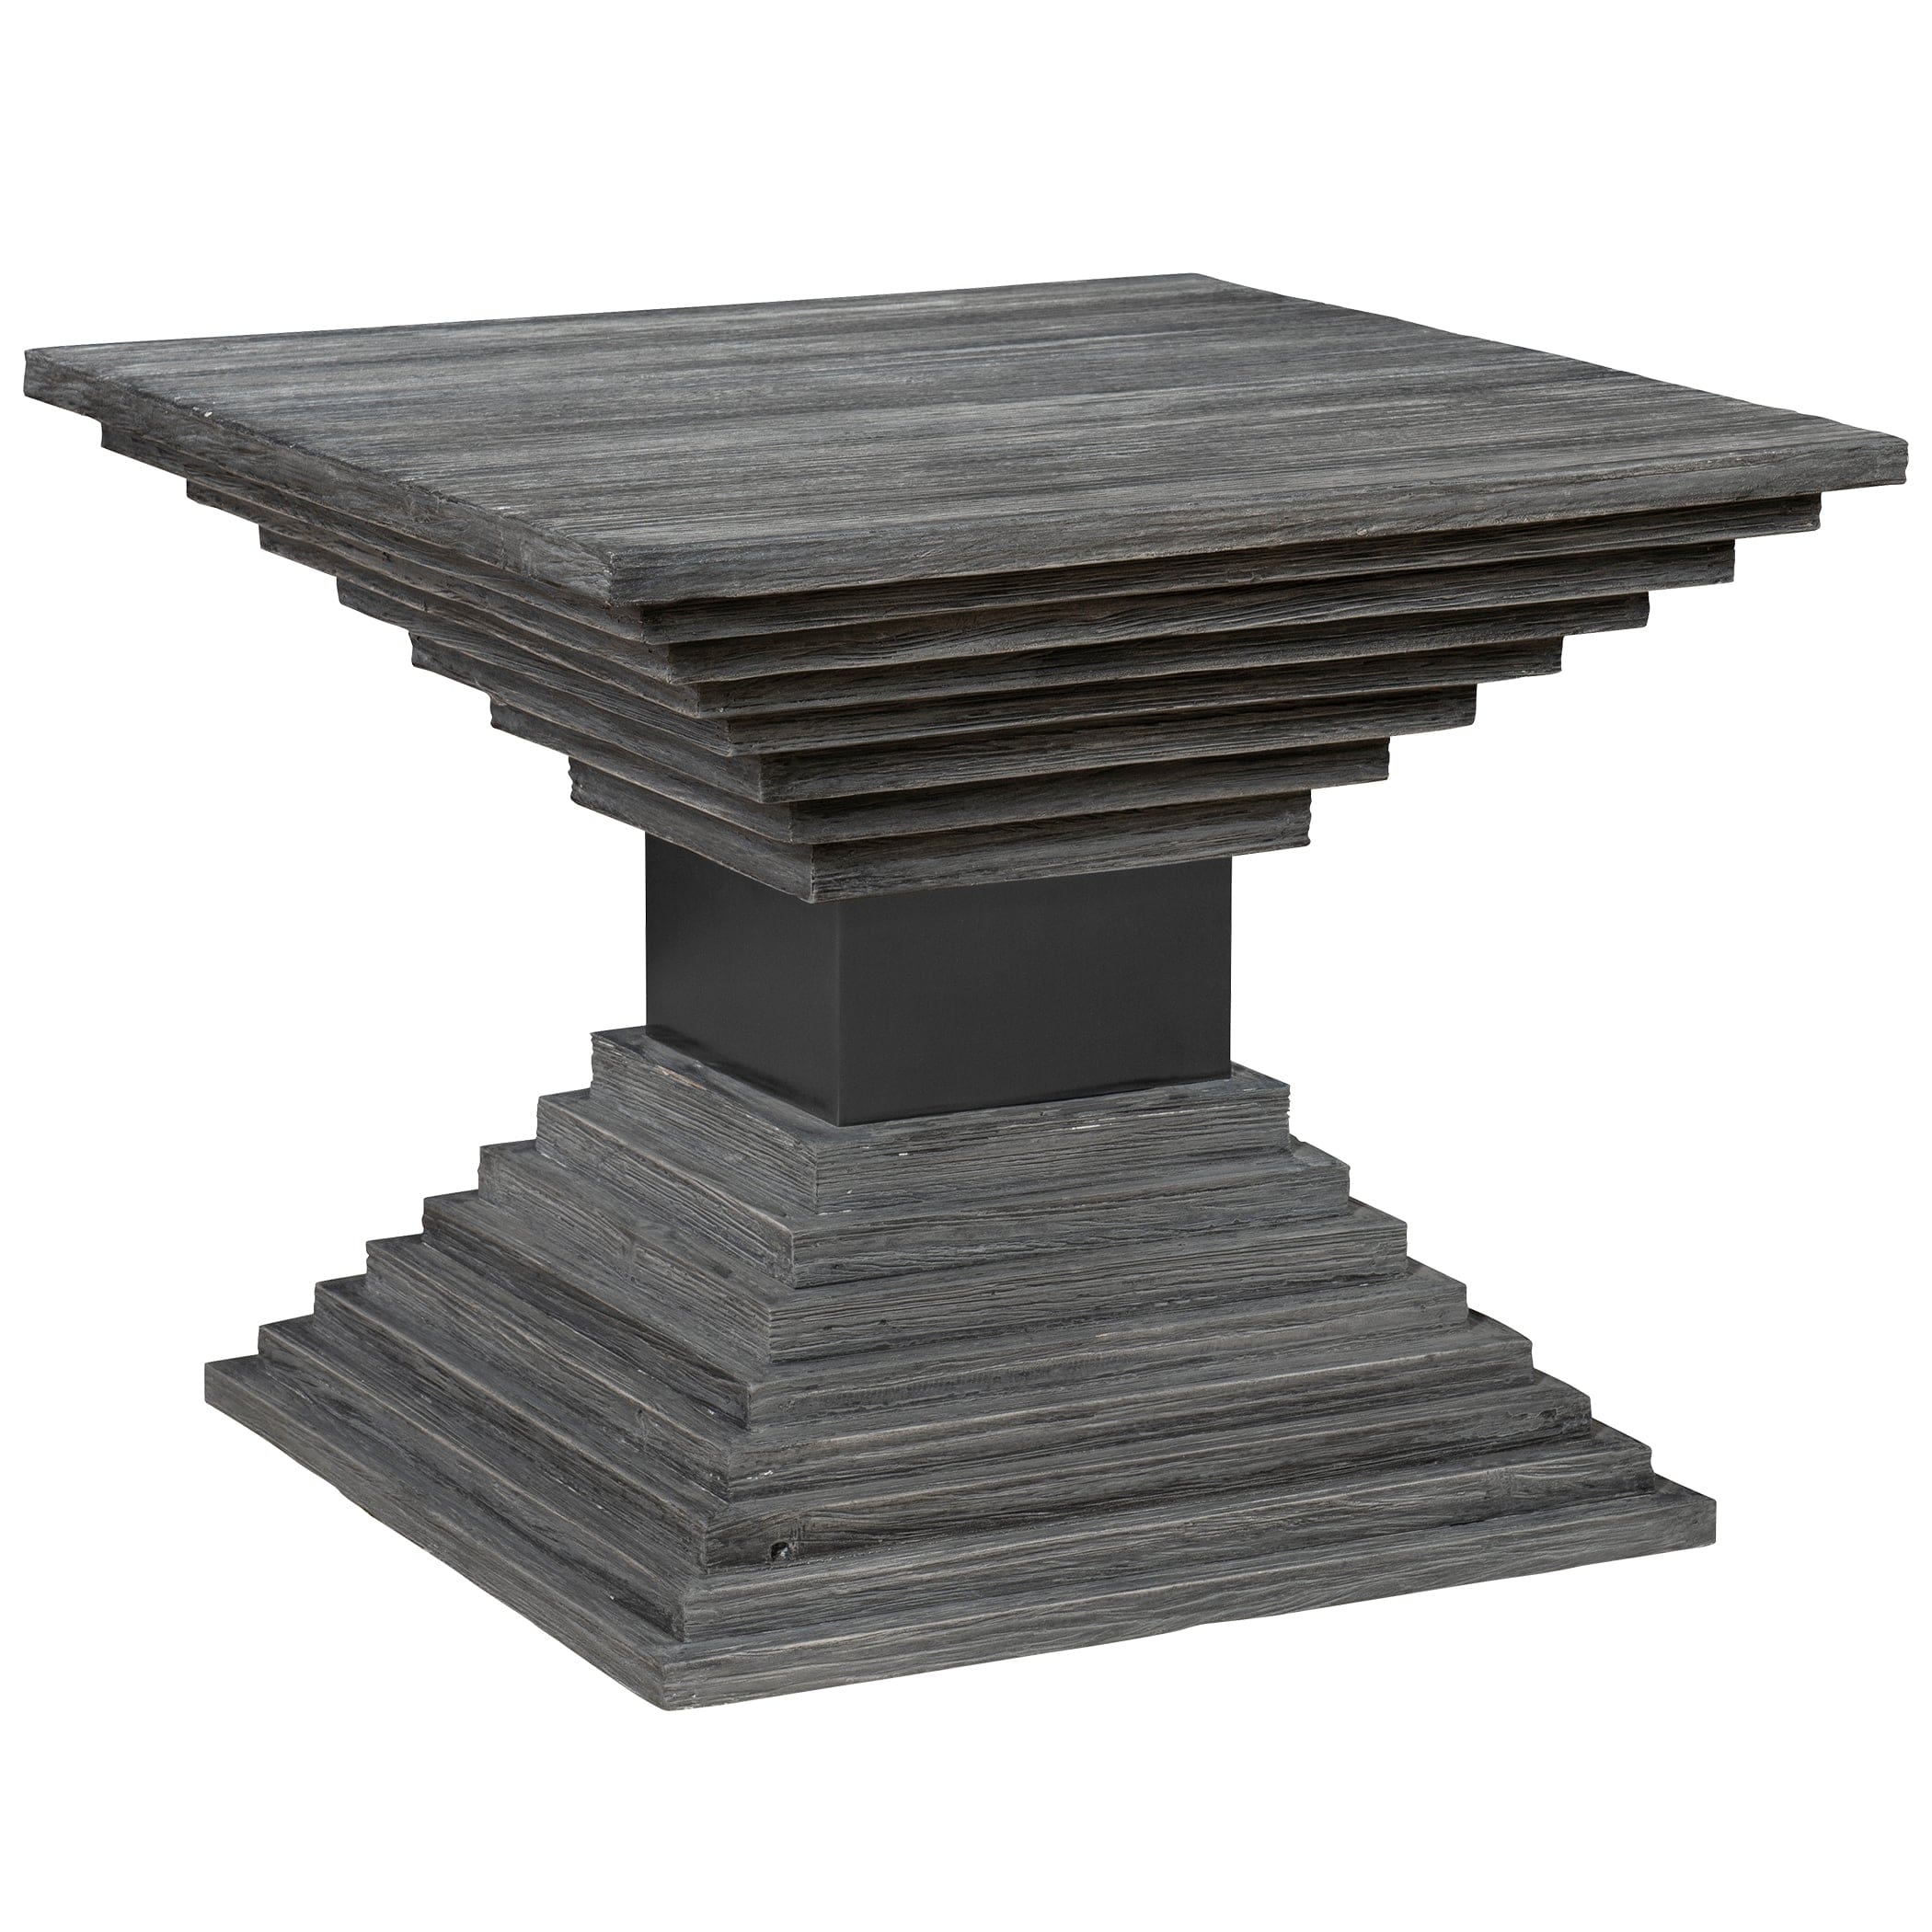 Andes Wooden Geometric Accent Table Uttermost